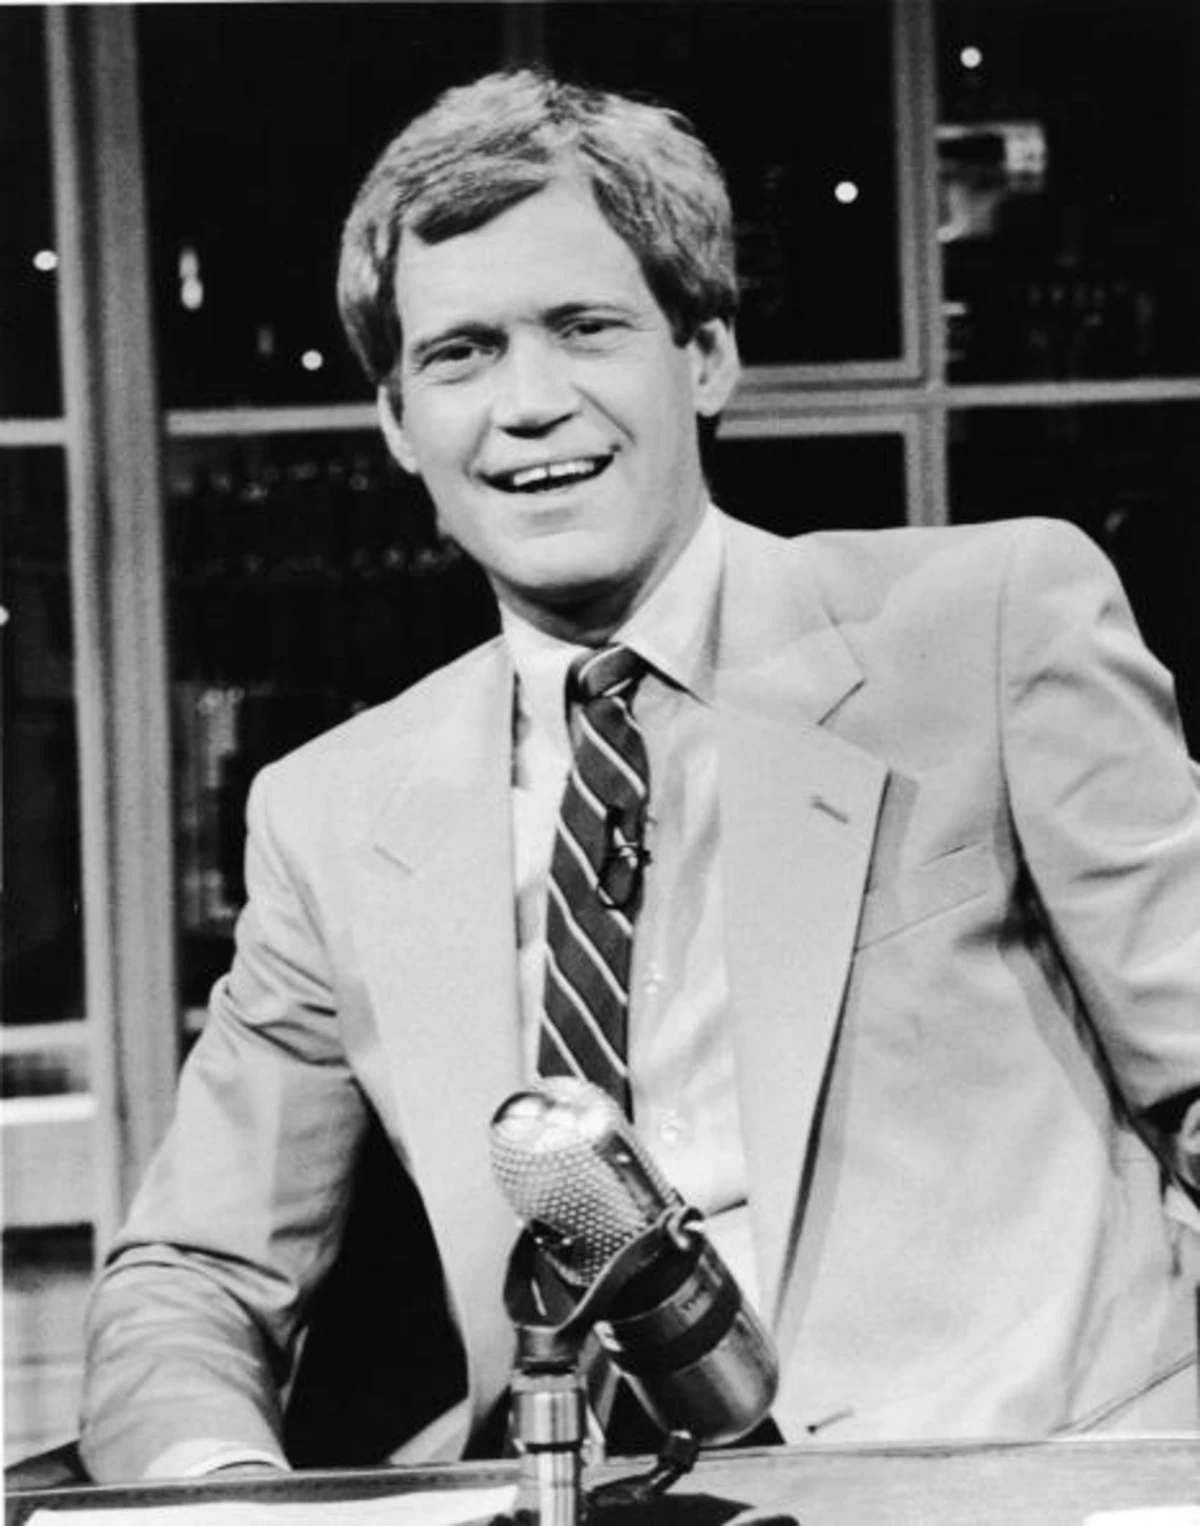 Top 10 List of the Funniest David Letterman Top 10 Lists of All-time